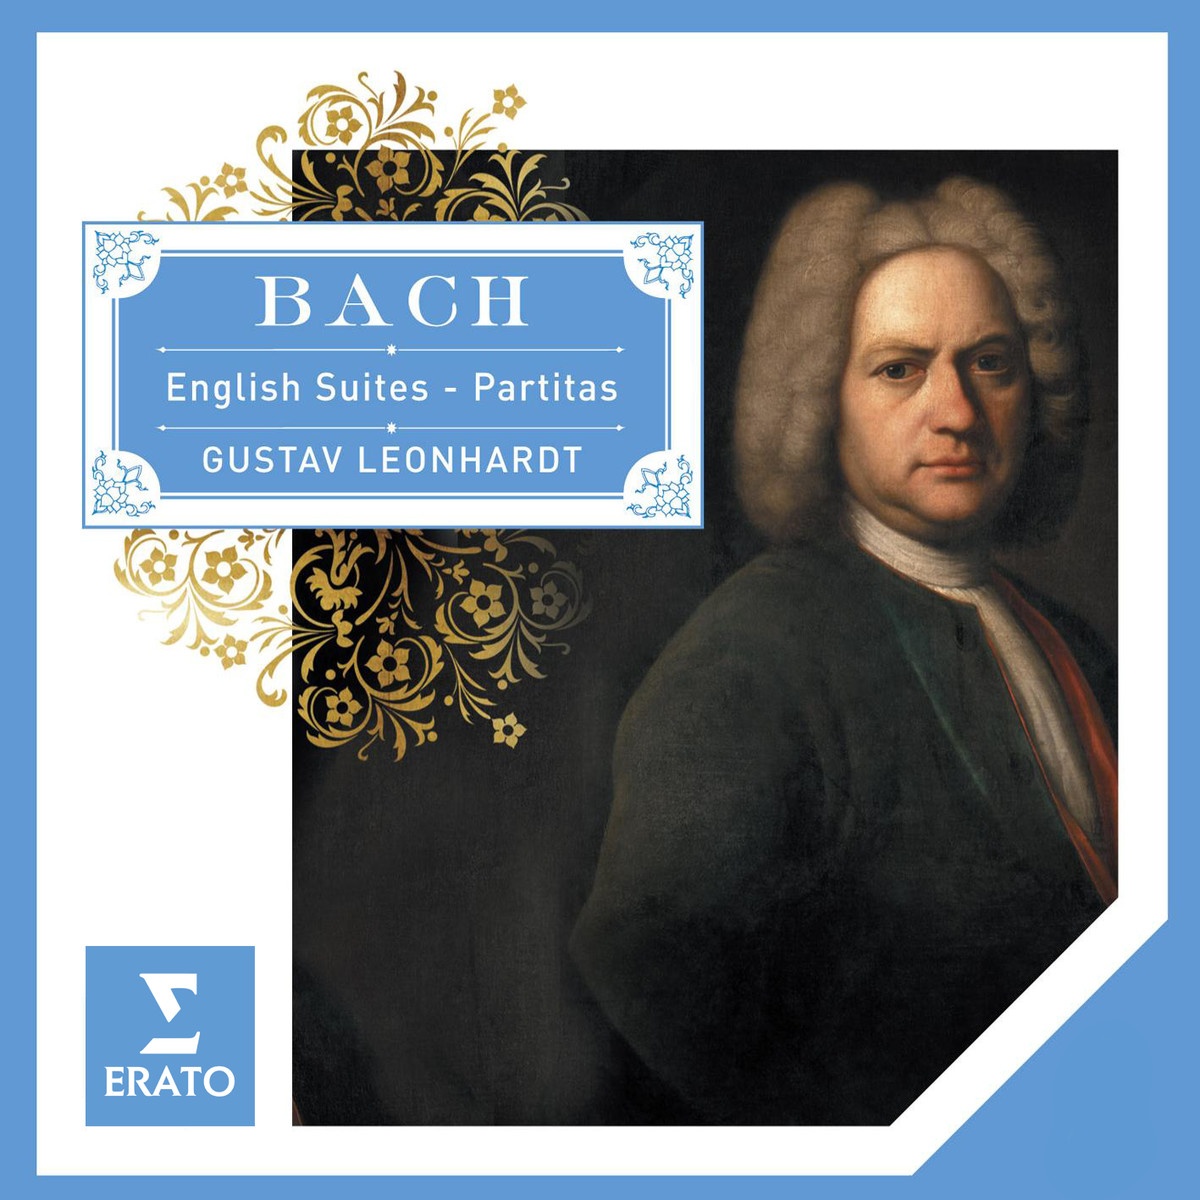 6 English Suites BWV806-811, No. 5 in E minor BWV810: Gigue